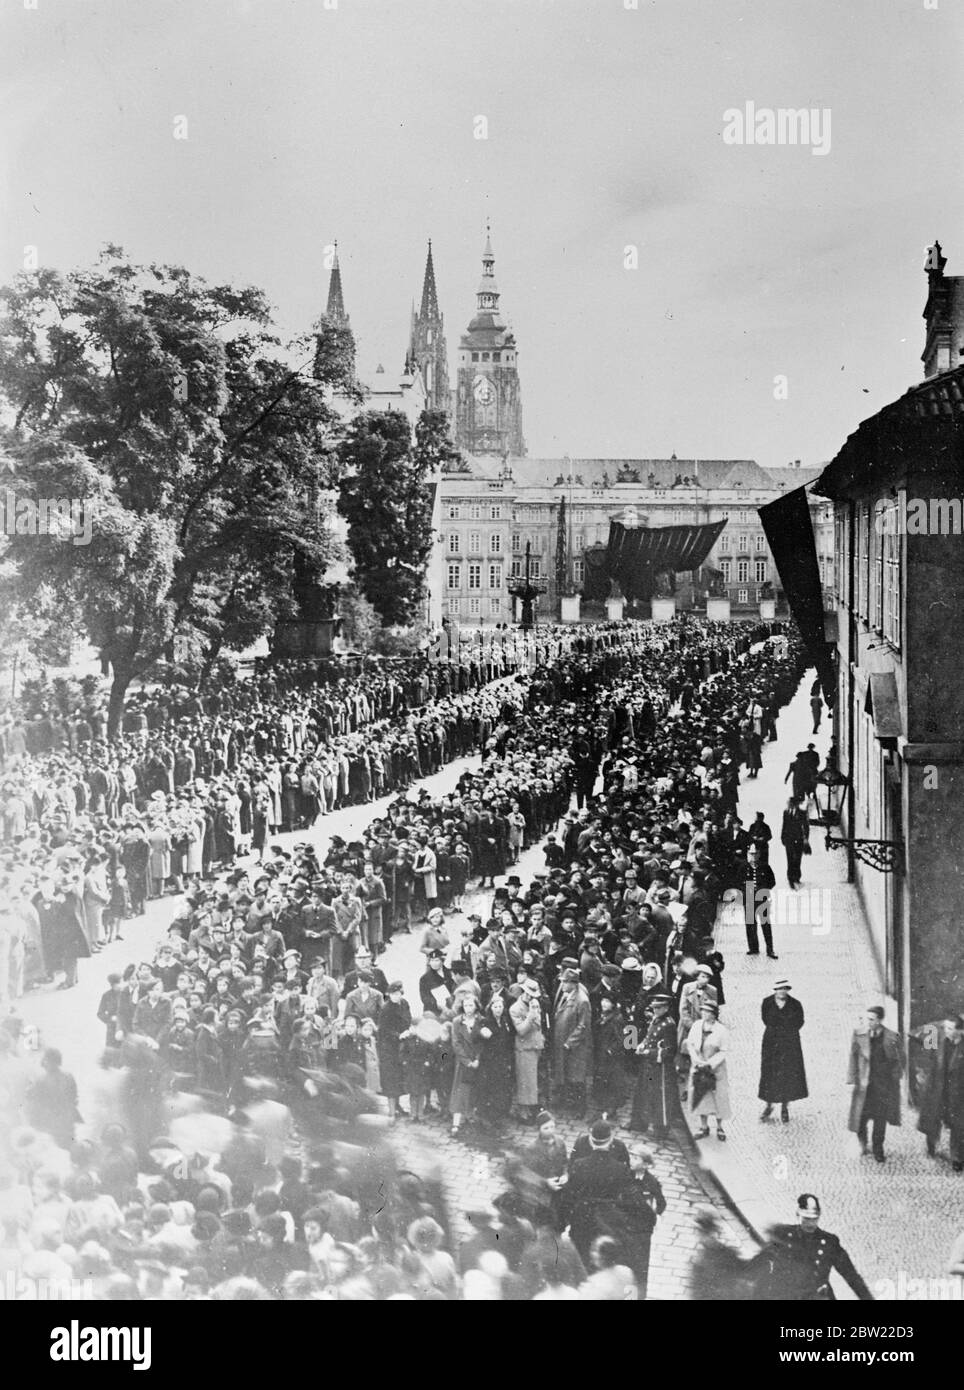 In four long queues, thousands of people waited to file past the bier of Dr Masaryk, founder and first president of Czechoslovakia at the lying in state in Prague. All Czechoslovakia is in mourning for their liberator. 20 September 1937. Stock Photo